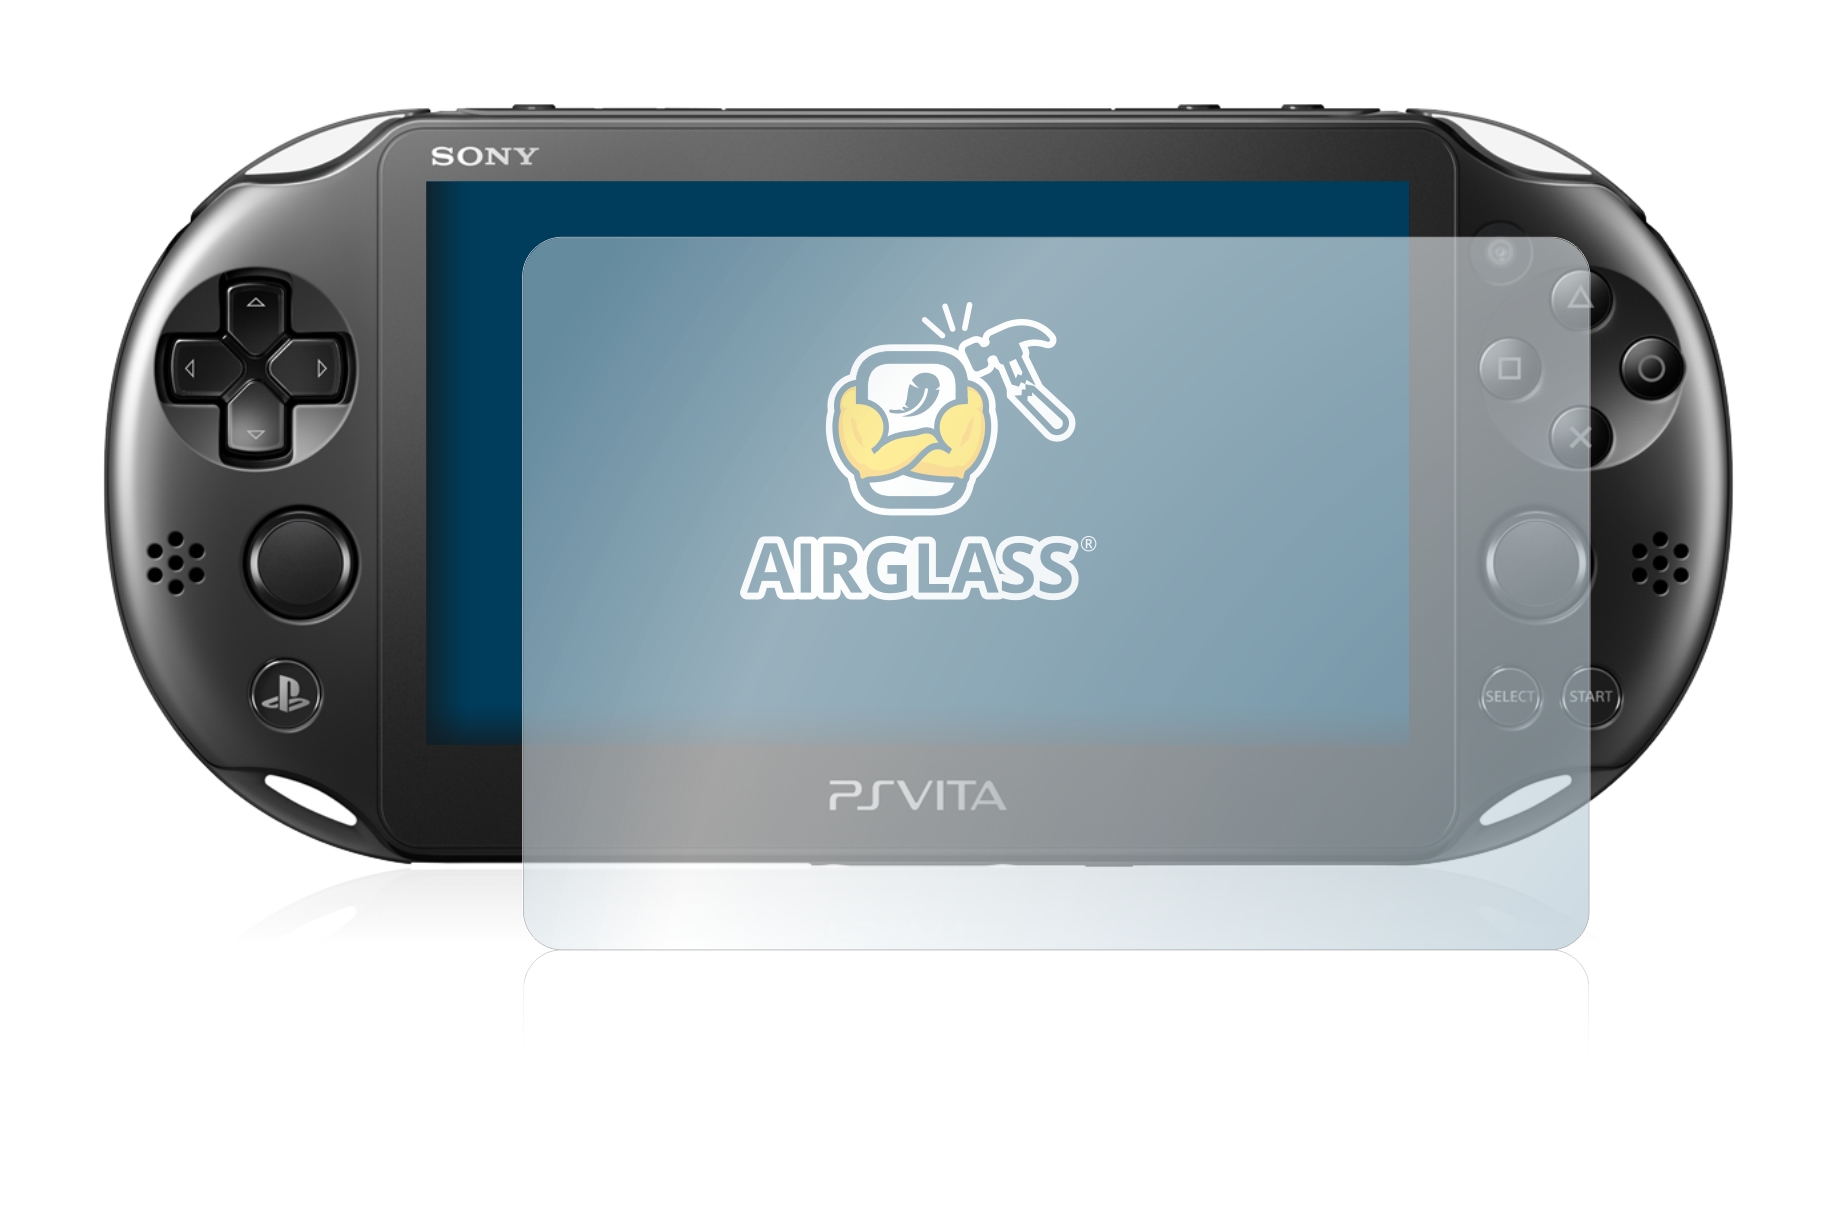 Screen Protector for Sony PCH-2000-Serie PlayStation PS Vita Slim Touchpad BROTECT AirGlass Glass Protector ultra-thin, extra-hard, high-Transparency, anti-fingerprint coating, flexible